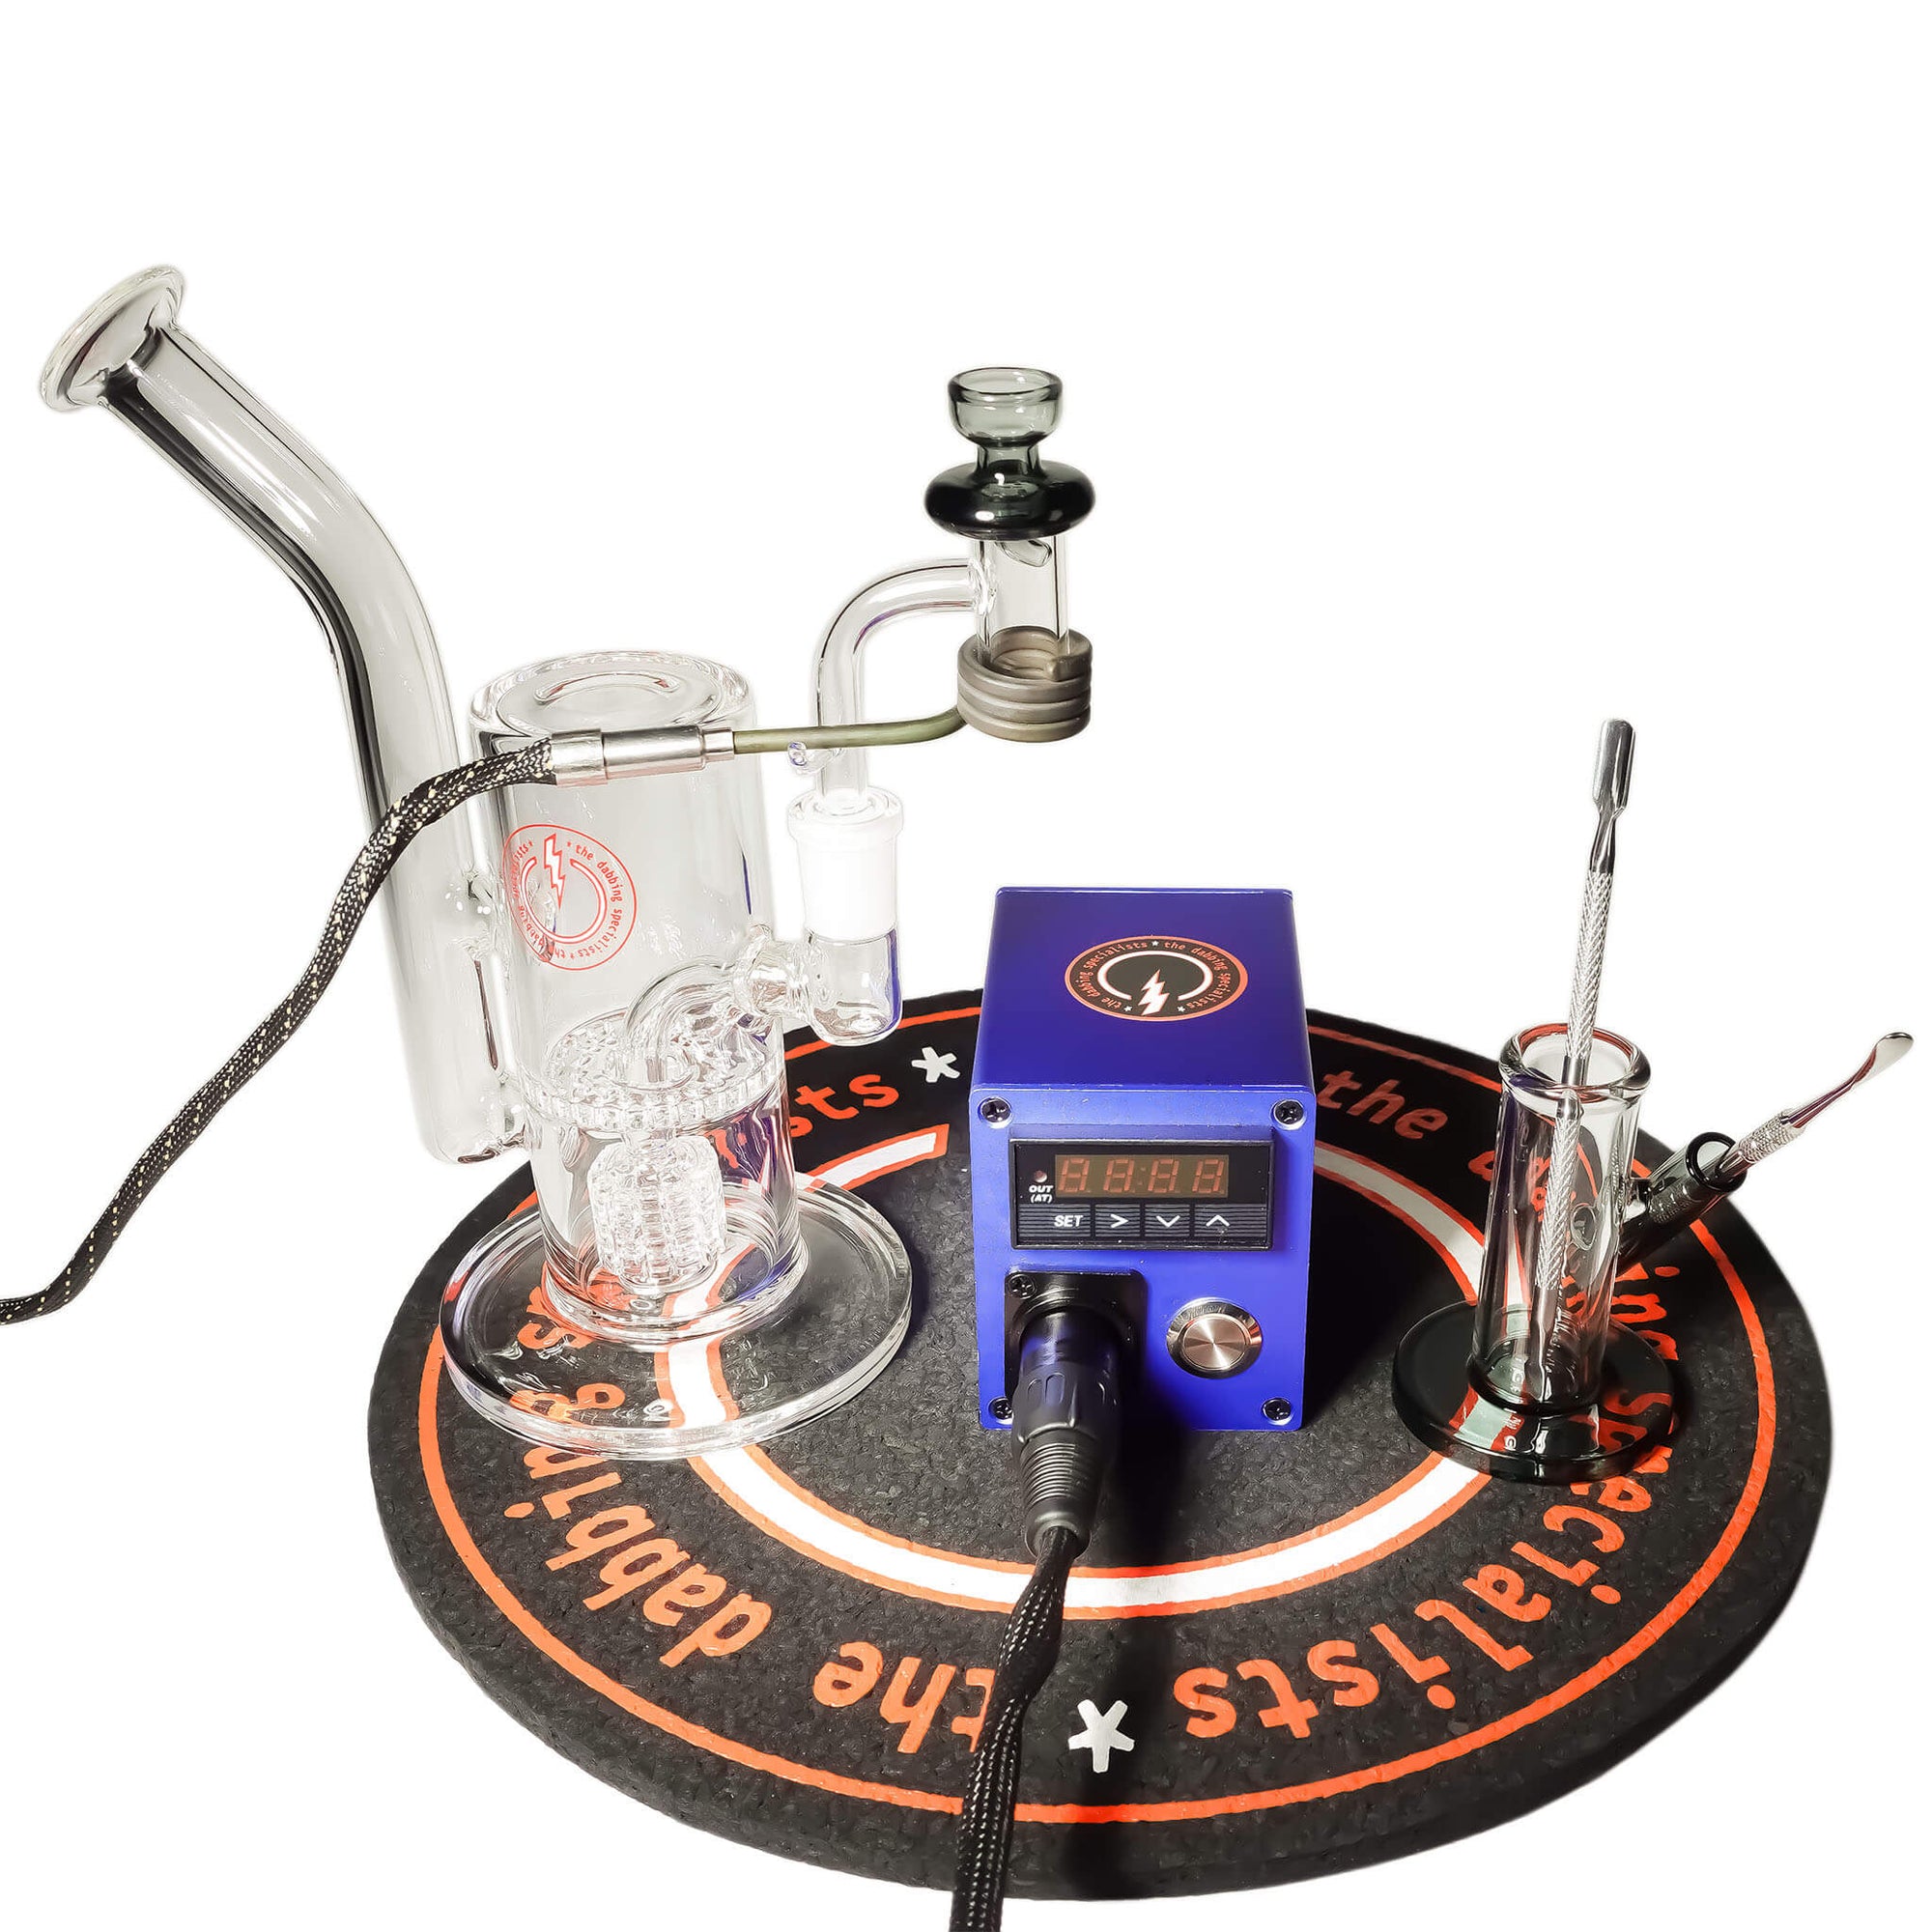 Reborn 16mm E-Banger Deluxe Enail Kit | Red Enail Kit View | the dabbing specialists